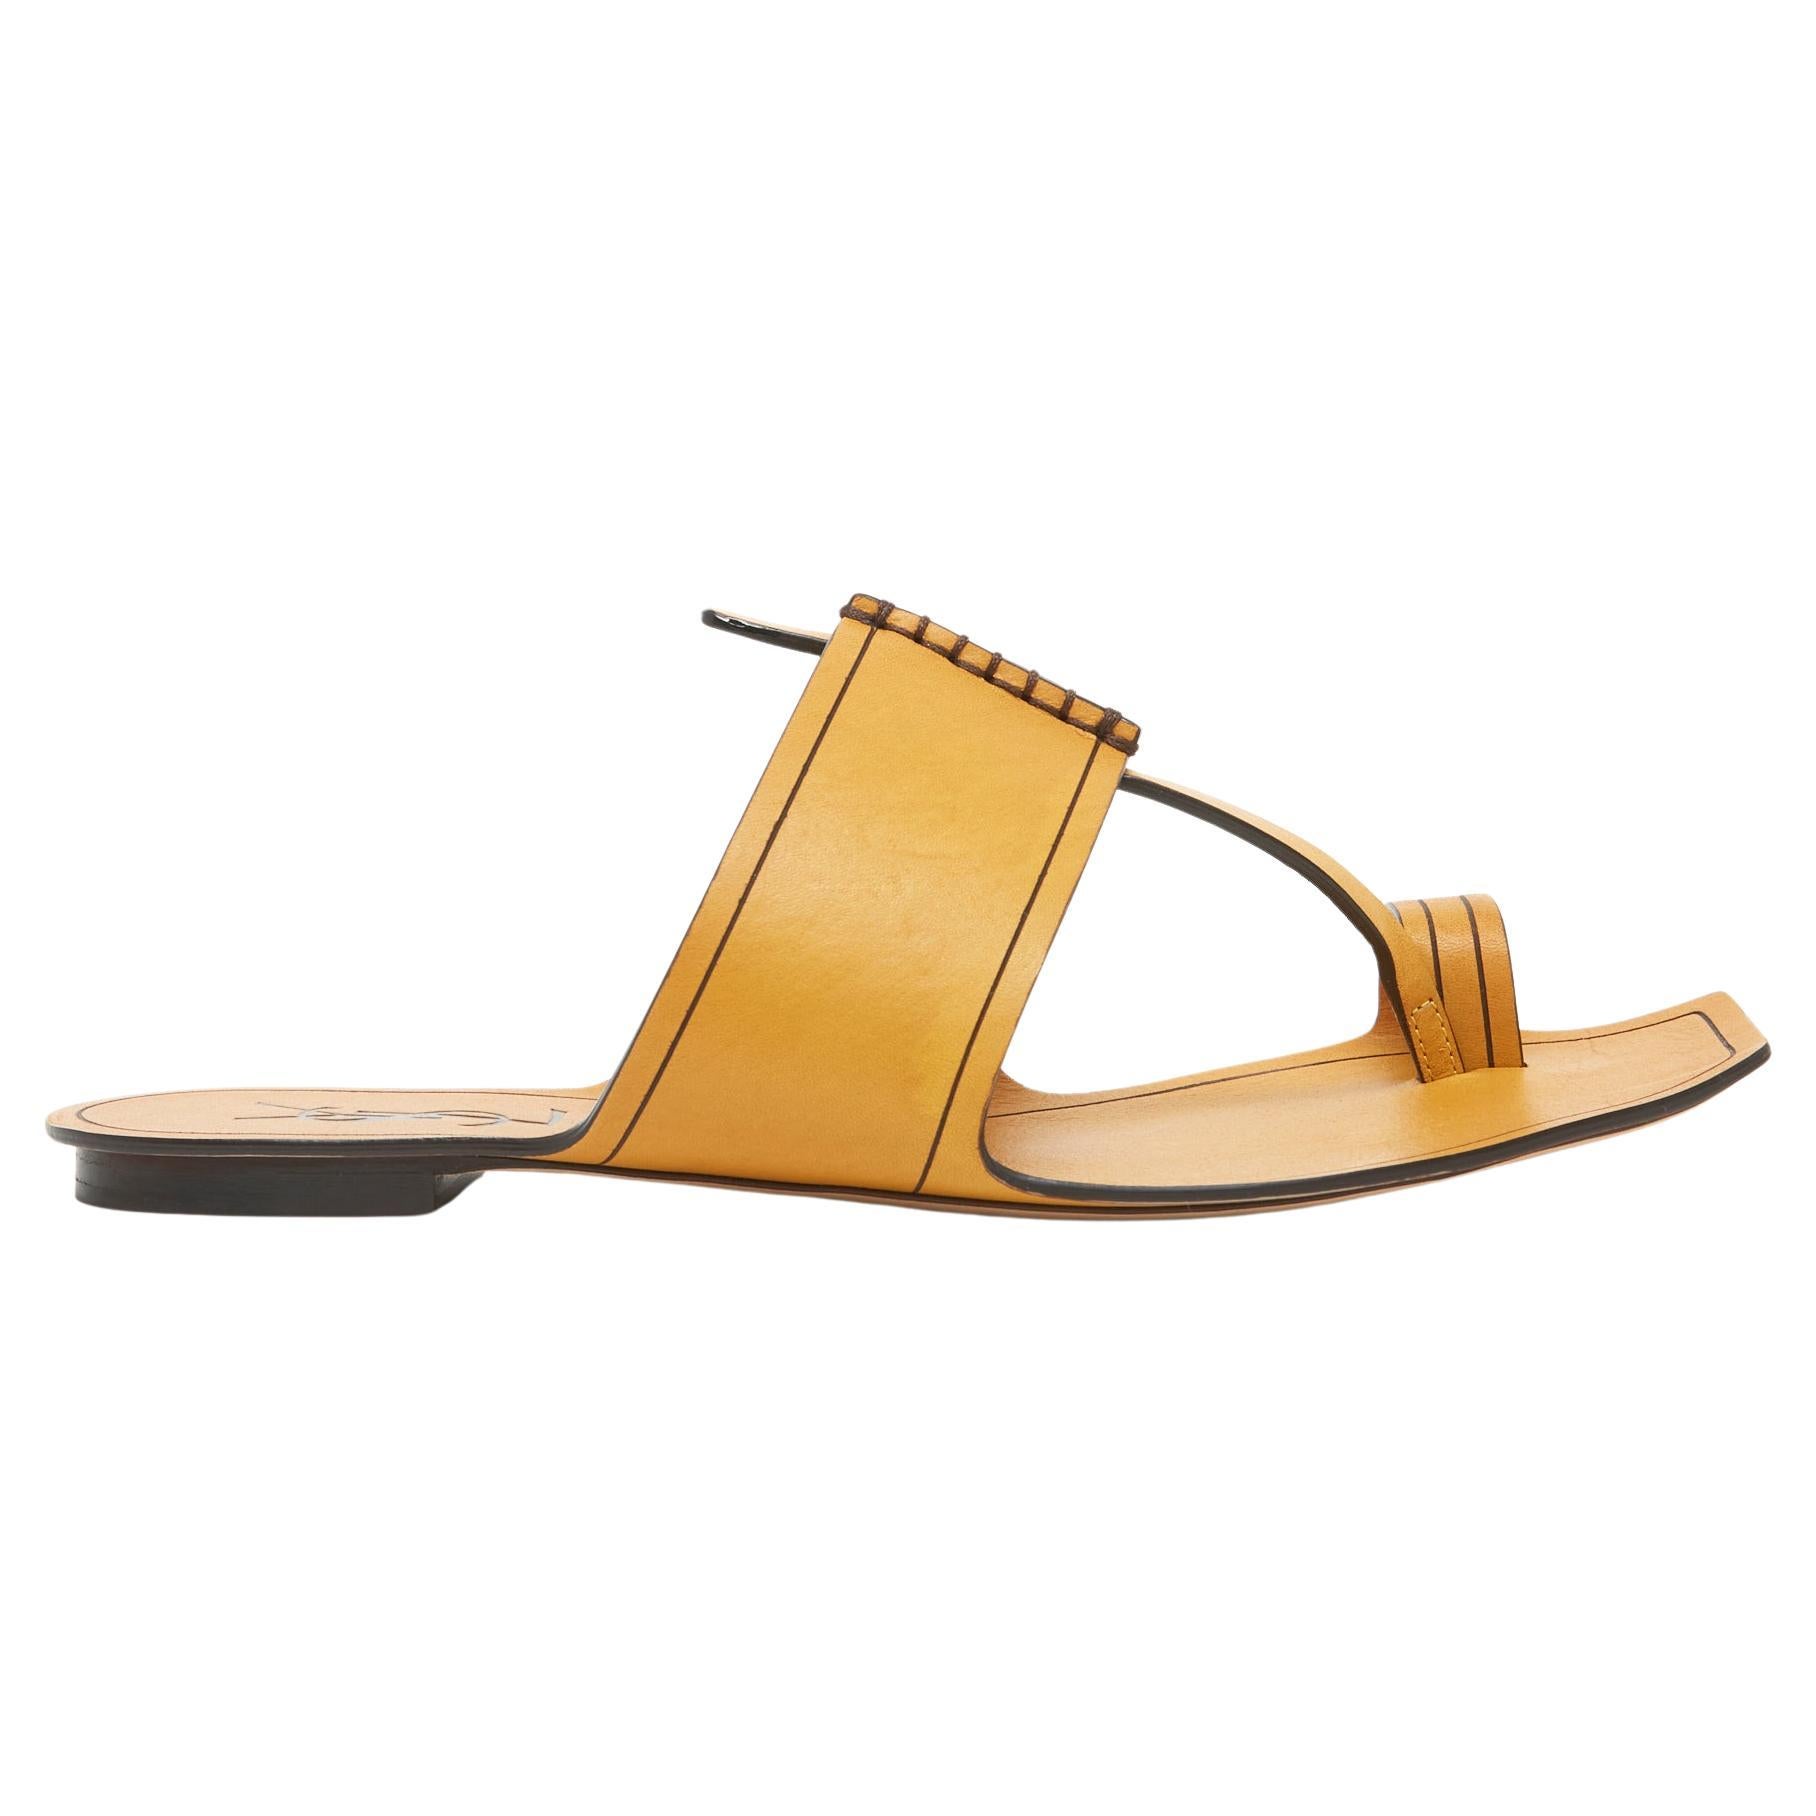 Yves Saint Laurent barefoot sandals, Saba model, in saffron yellow leather, leather interior and exterior soles. Size 37.5FR or US7: insole 24 cm. The sandals are new, delivered in their Saint Laurent box and dustbags, magnificent and... sold out.